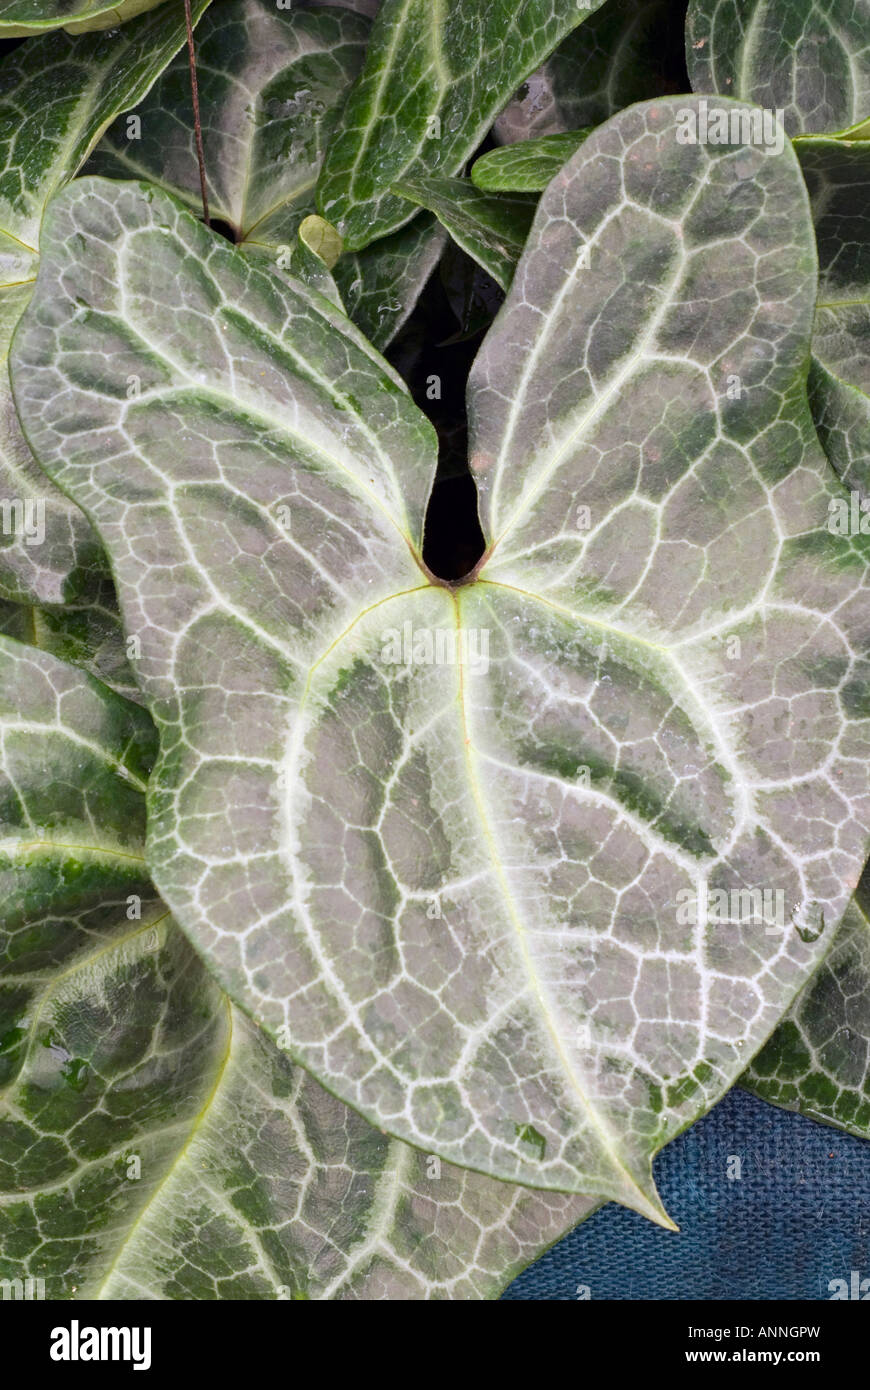 Asarum maximum (Chinese Wild Ginger, Panda Faced Ginger) closeup of veins in leaf leaves, a rare woodland species from China Stock Photo